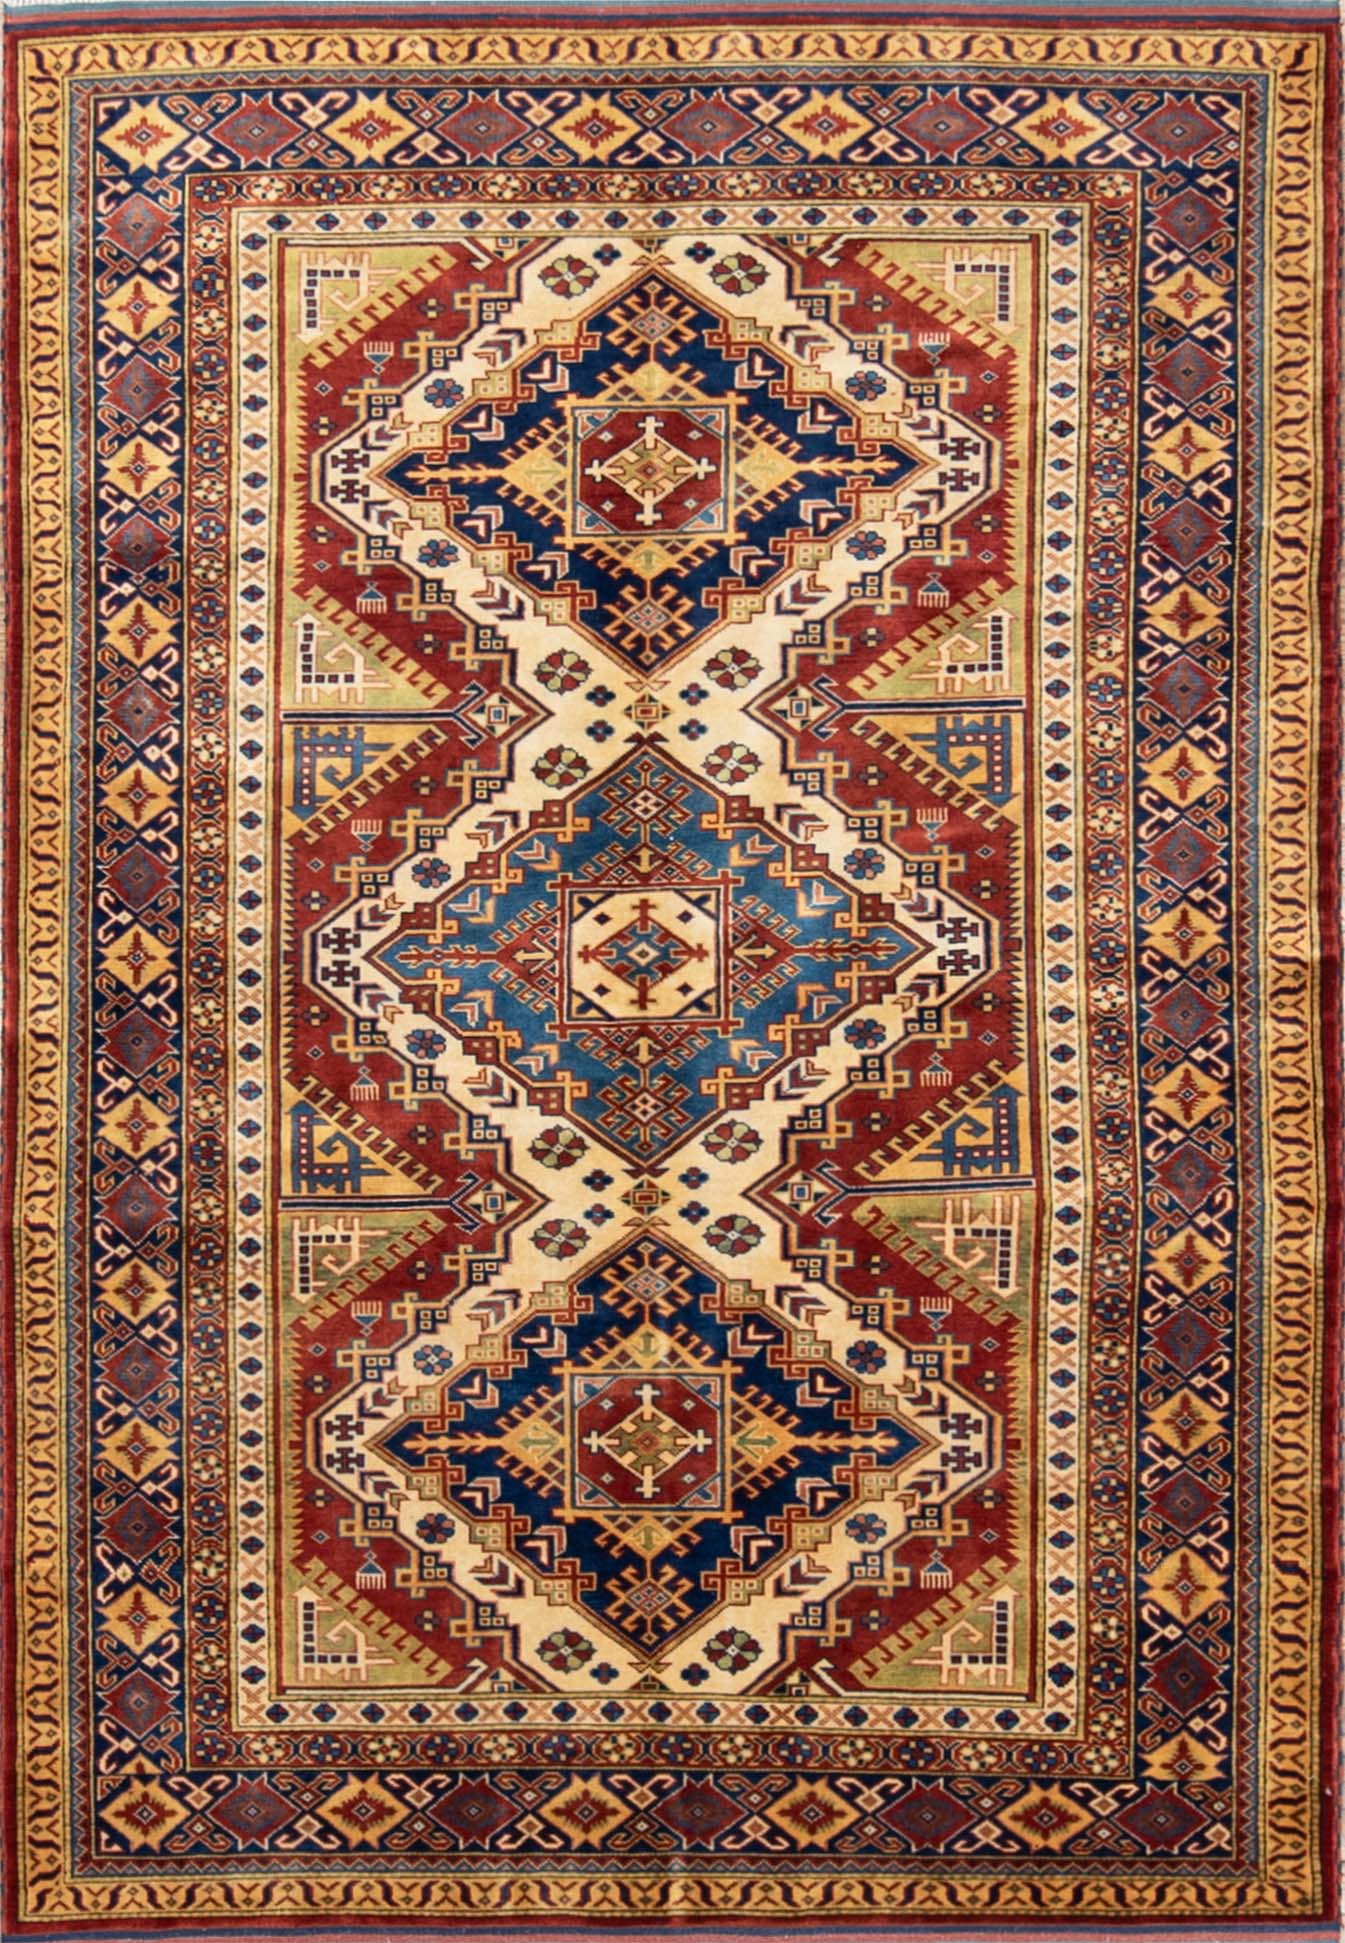 Small oriental rug. Hand woven Caucasian style wool rug in red color made in Pakistan. Size 4.10x7.8.